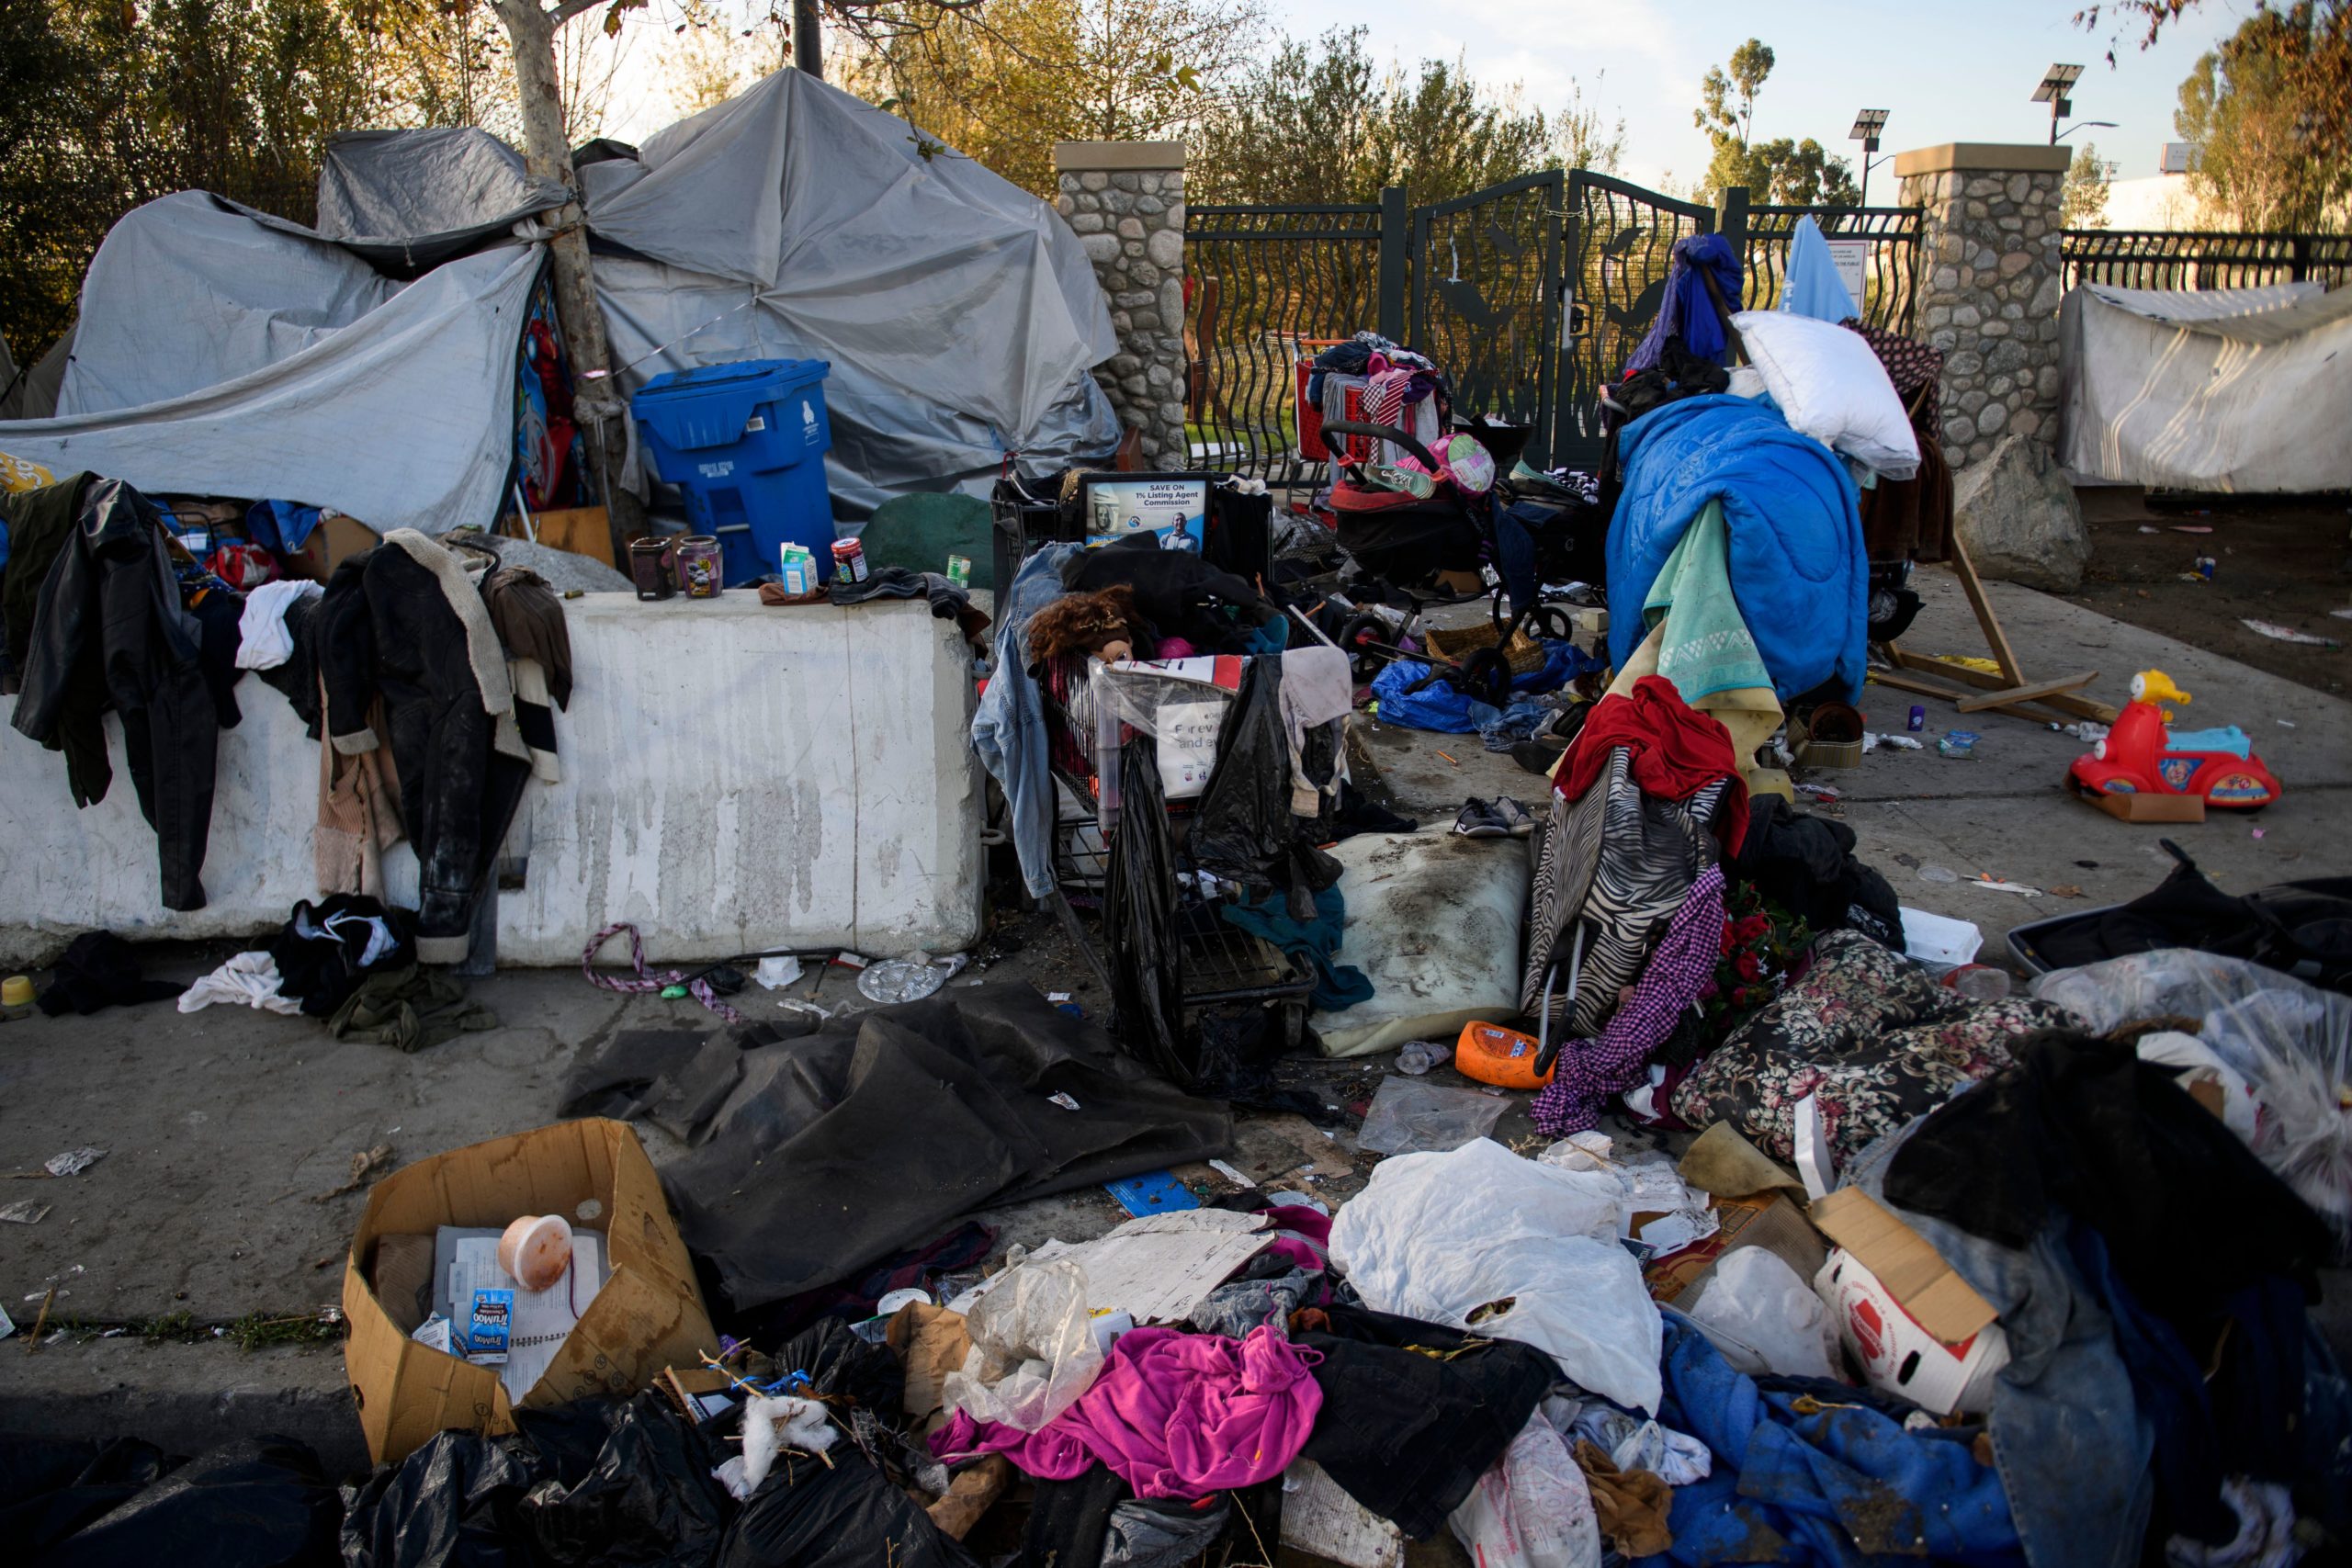 A mixture of an unhoused person's belongings and other debris covers a sidewalk outside of their shelter before Los Angeles City Sanitation workers conduct a cleanup sweep of a homeless encampment during the Covid-19 pandemic. (Photo by PATRICK T. FALLON/AFP via Getty Images)